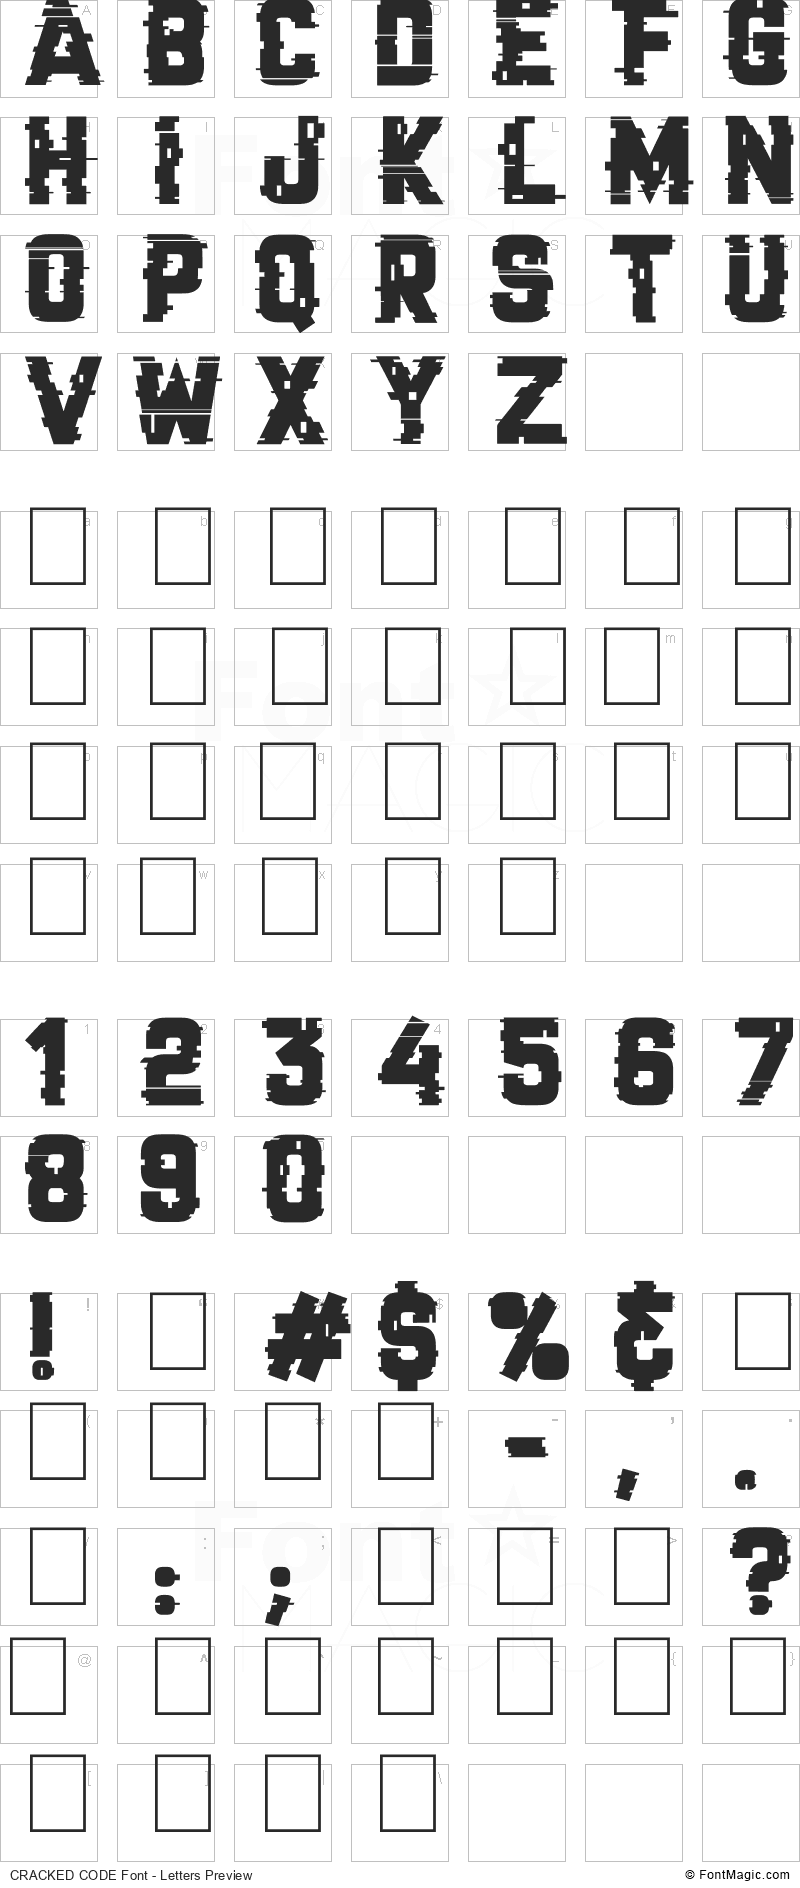 CRACKED CODE Font - All Latters Preview Chart